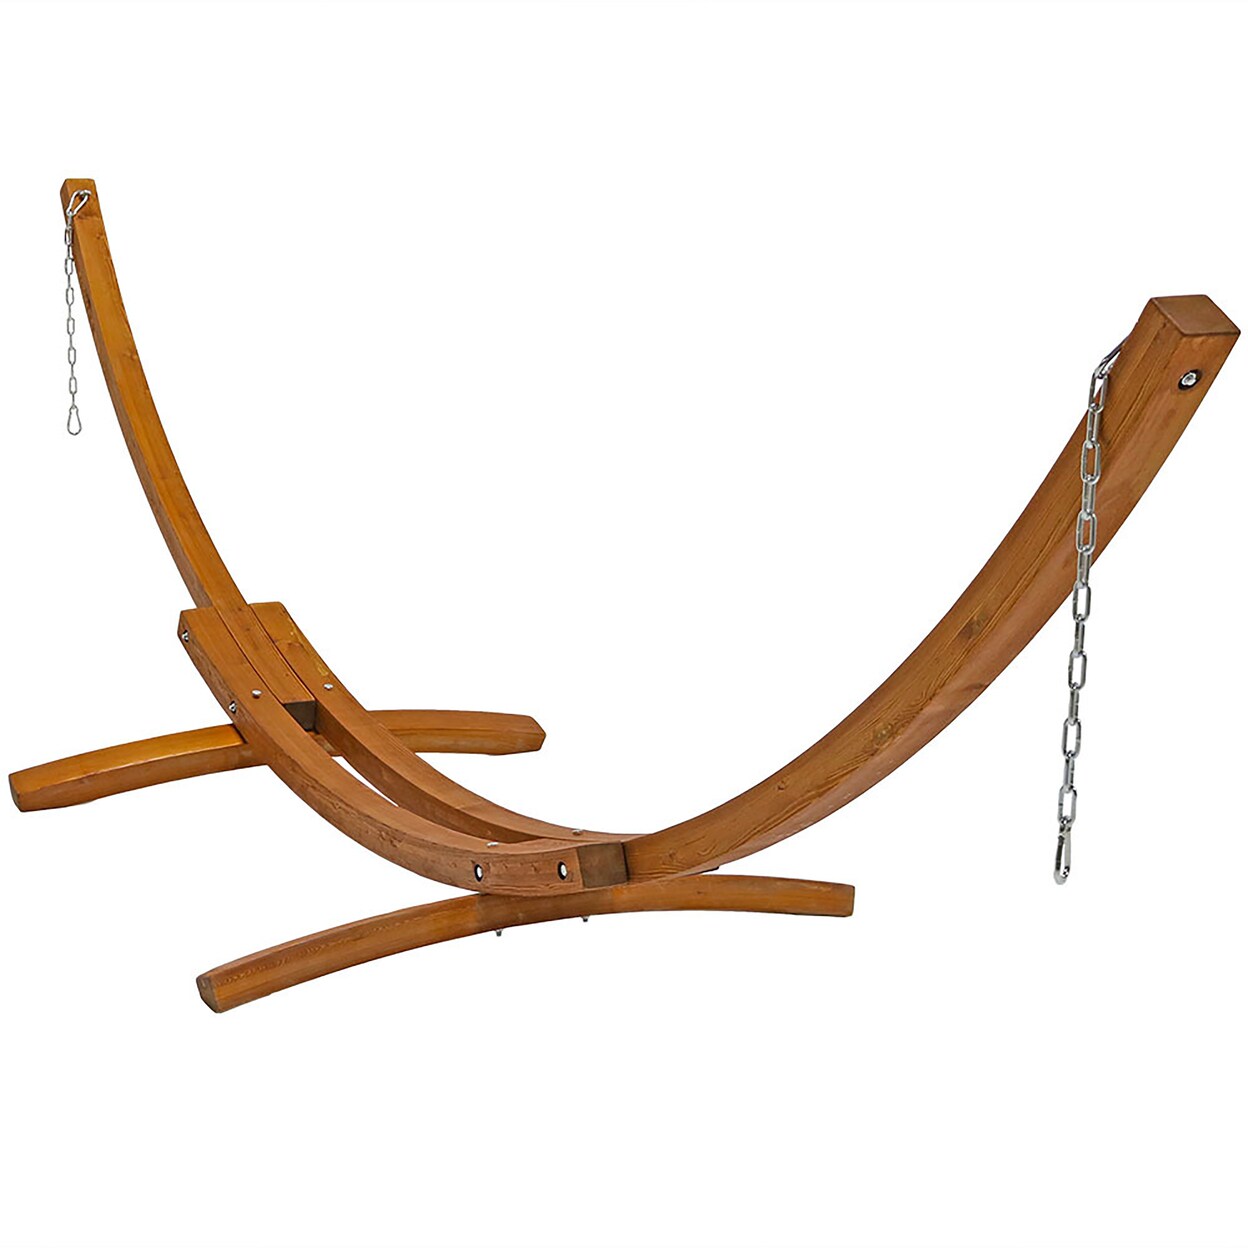 Sunnydaze   Curved Wooden Arc Hammock Stand with Hooks and Chains - 13 ft